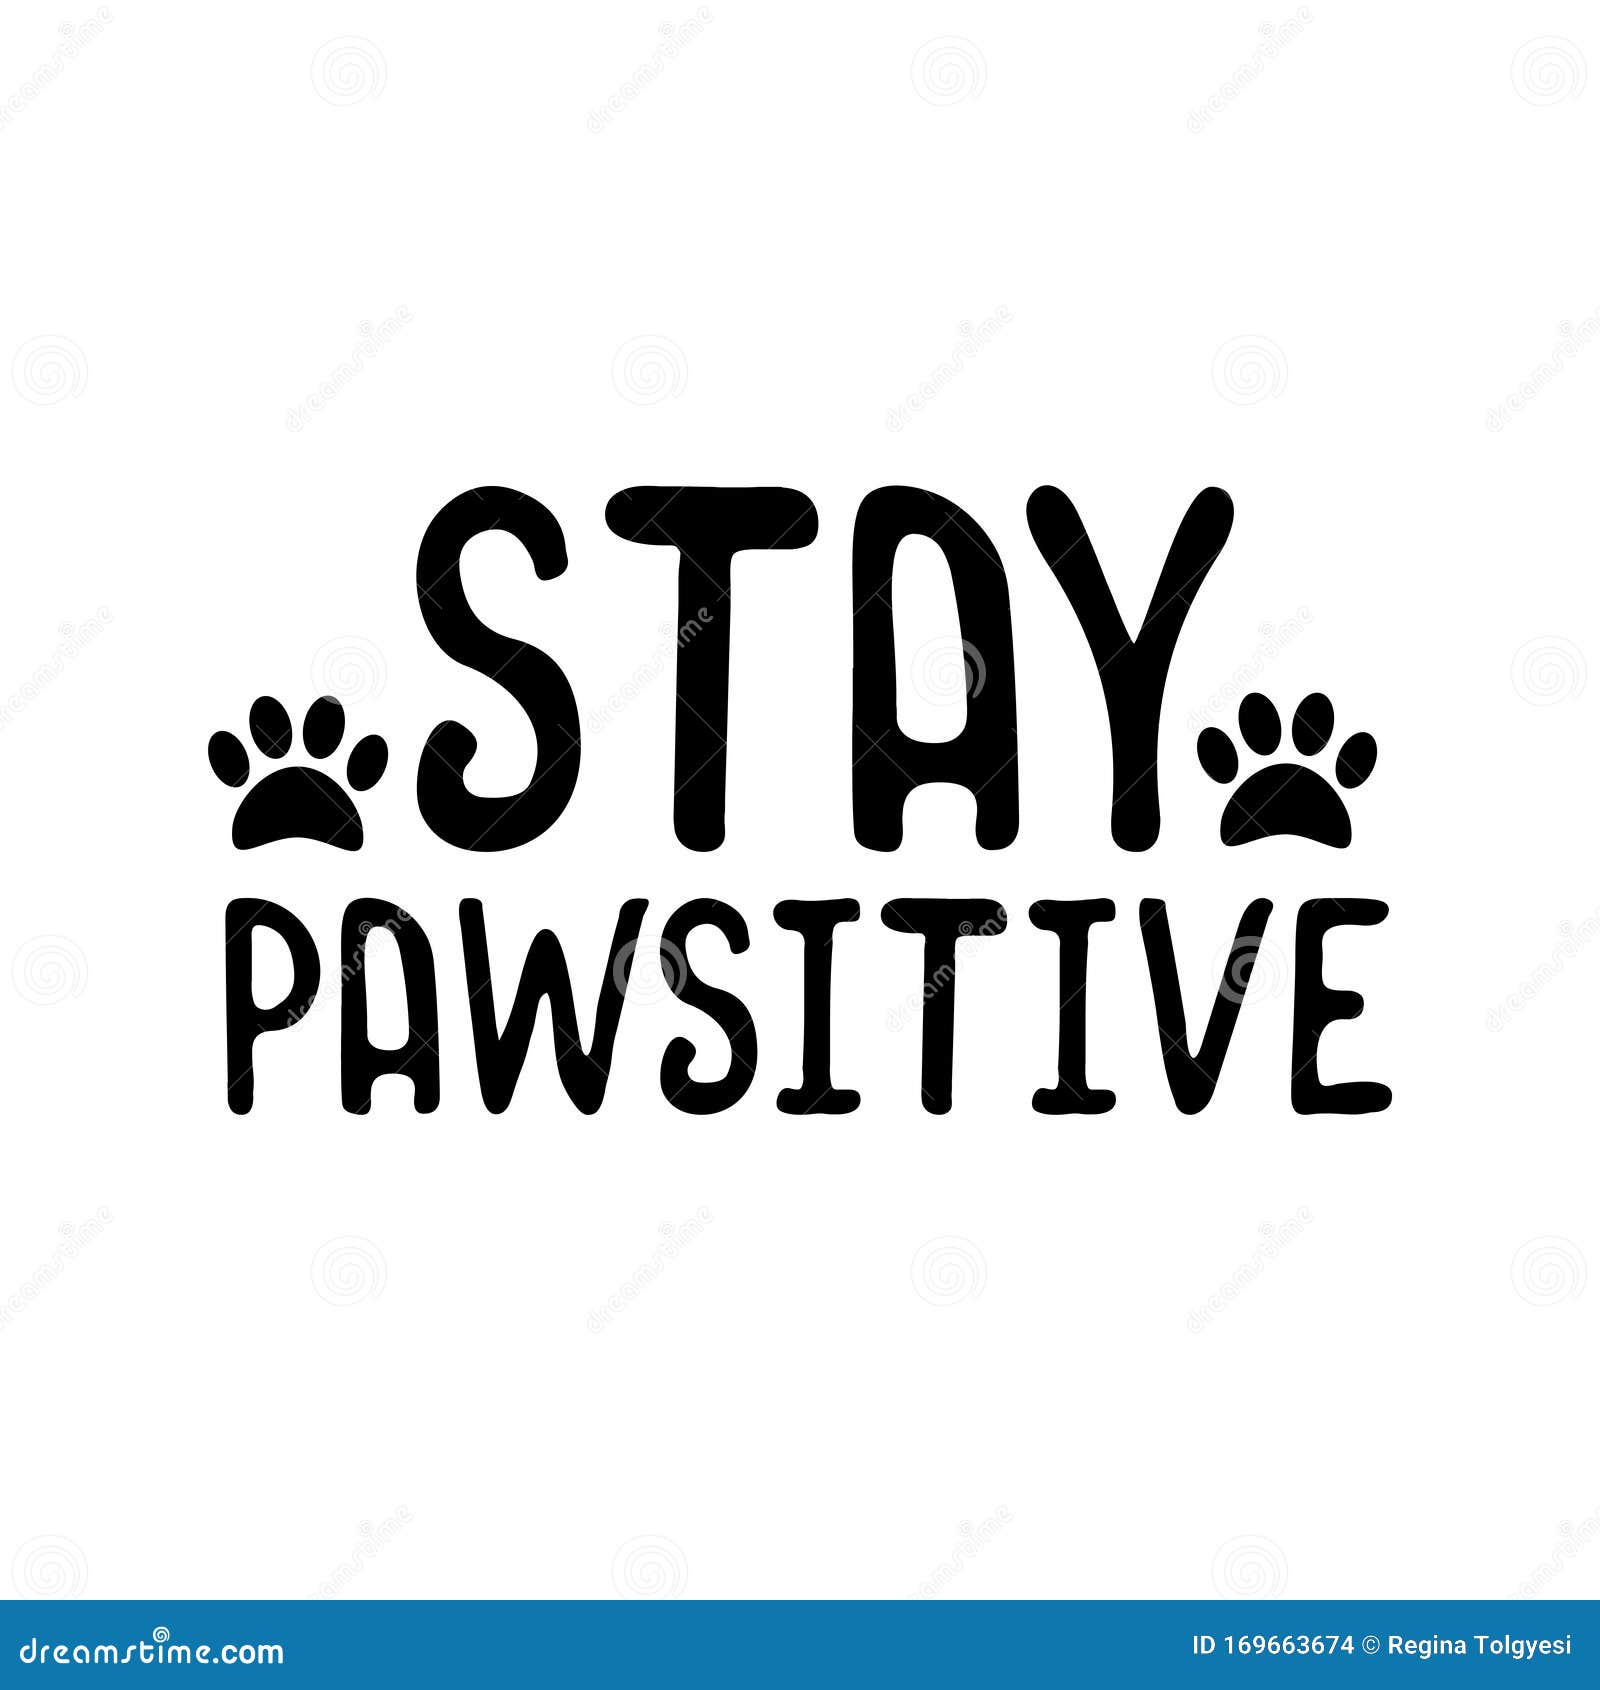 stay pawsitive- funny text with pawprint.